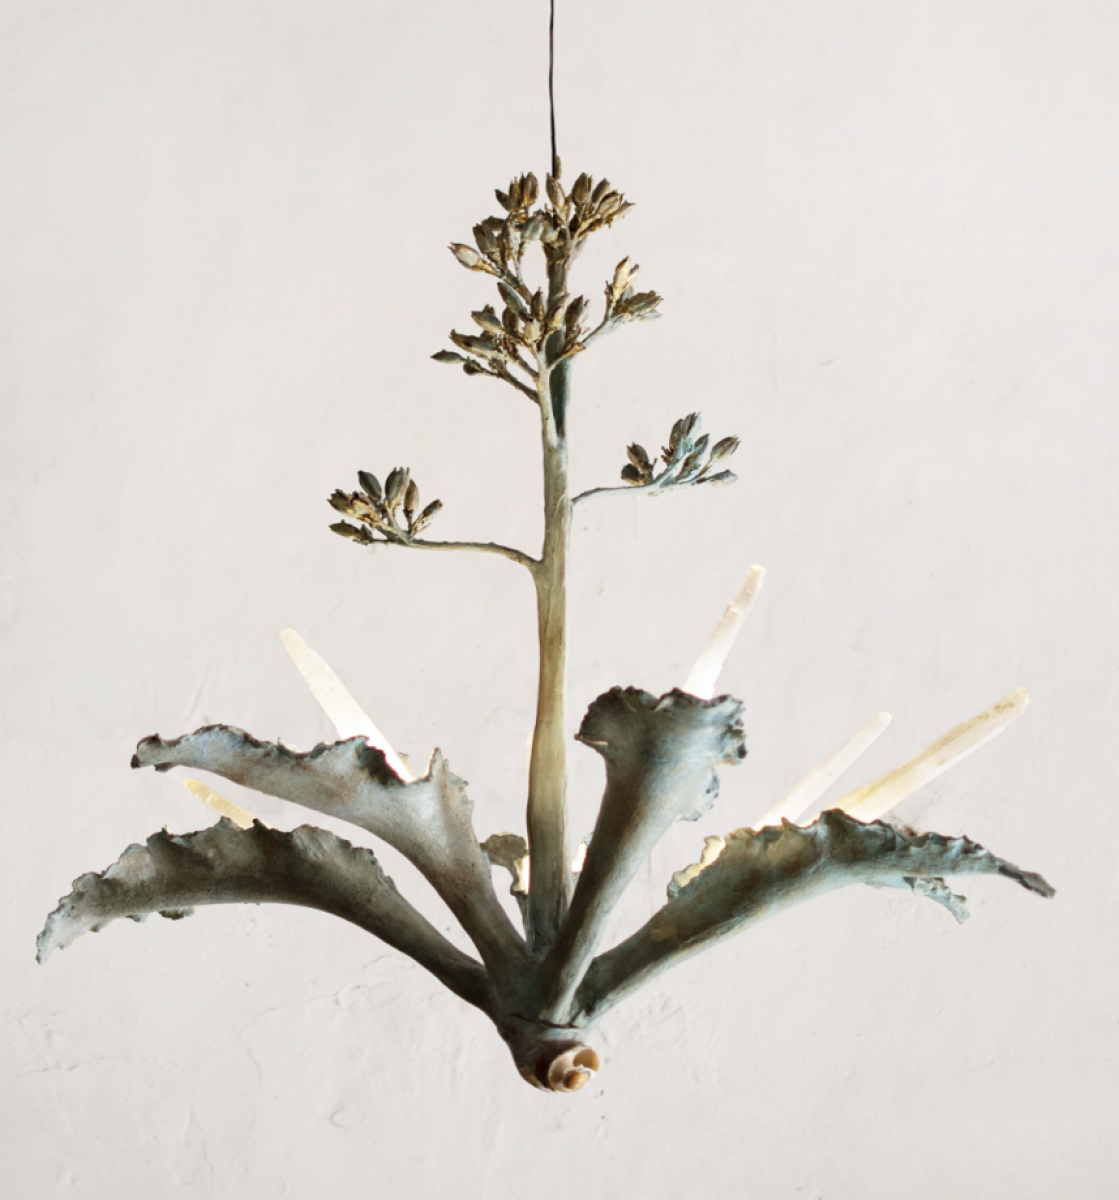 Chandelier Agave  Etienne Marc pic-3